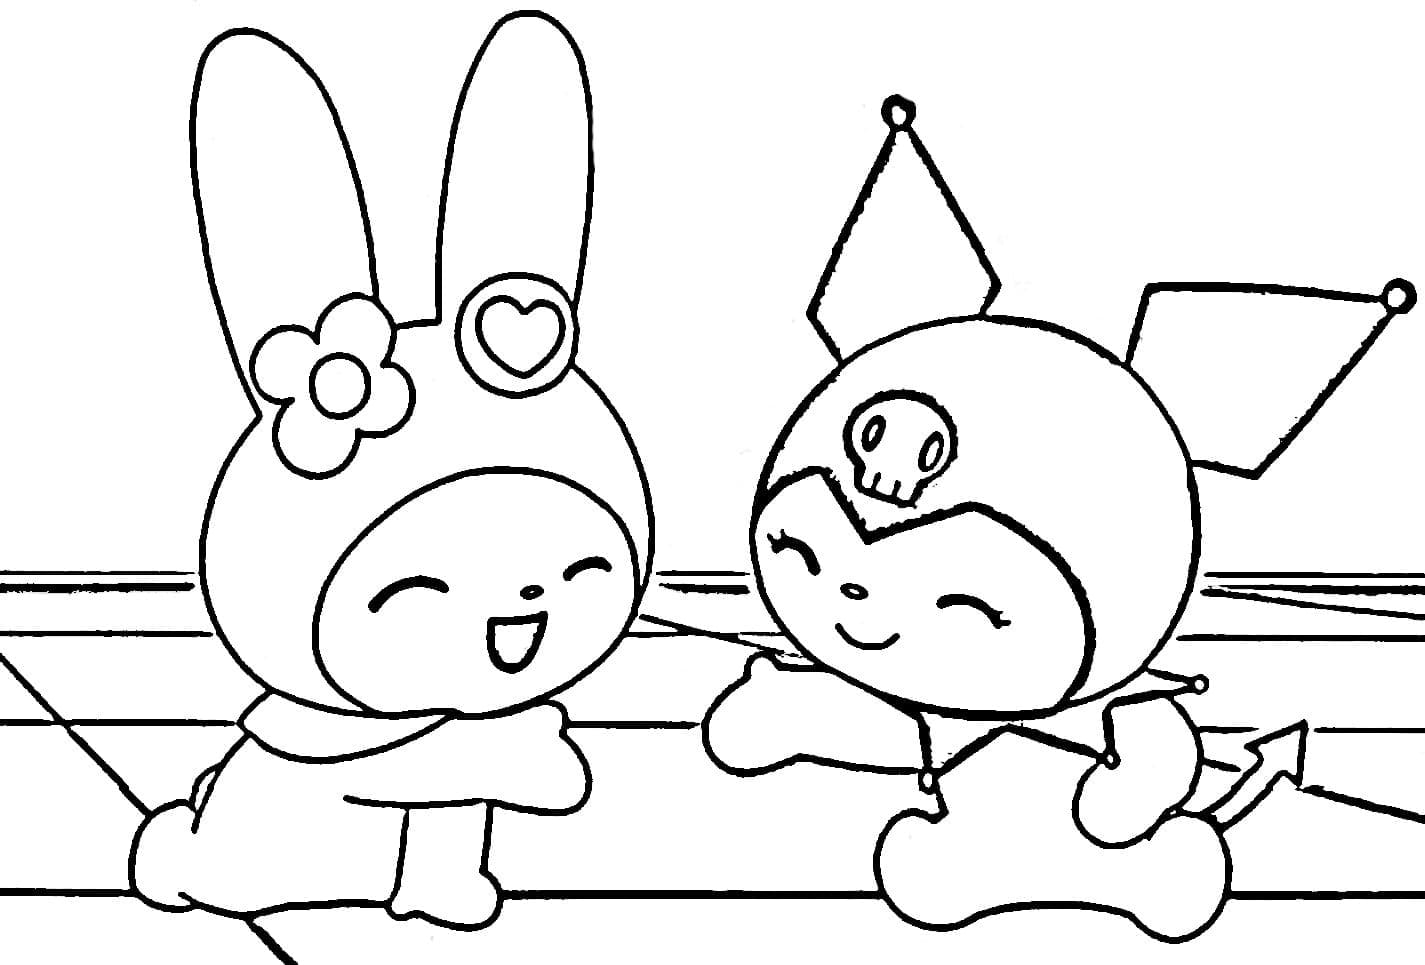 Happy My Melody and Kuromi coloring page - Download, Print or Color ...